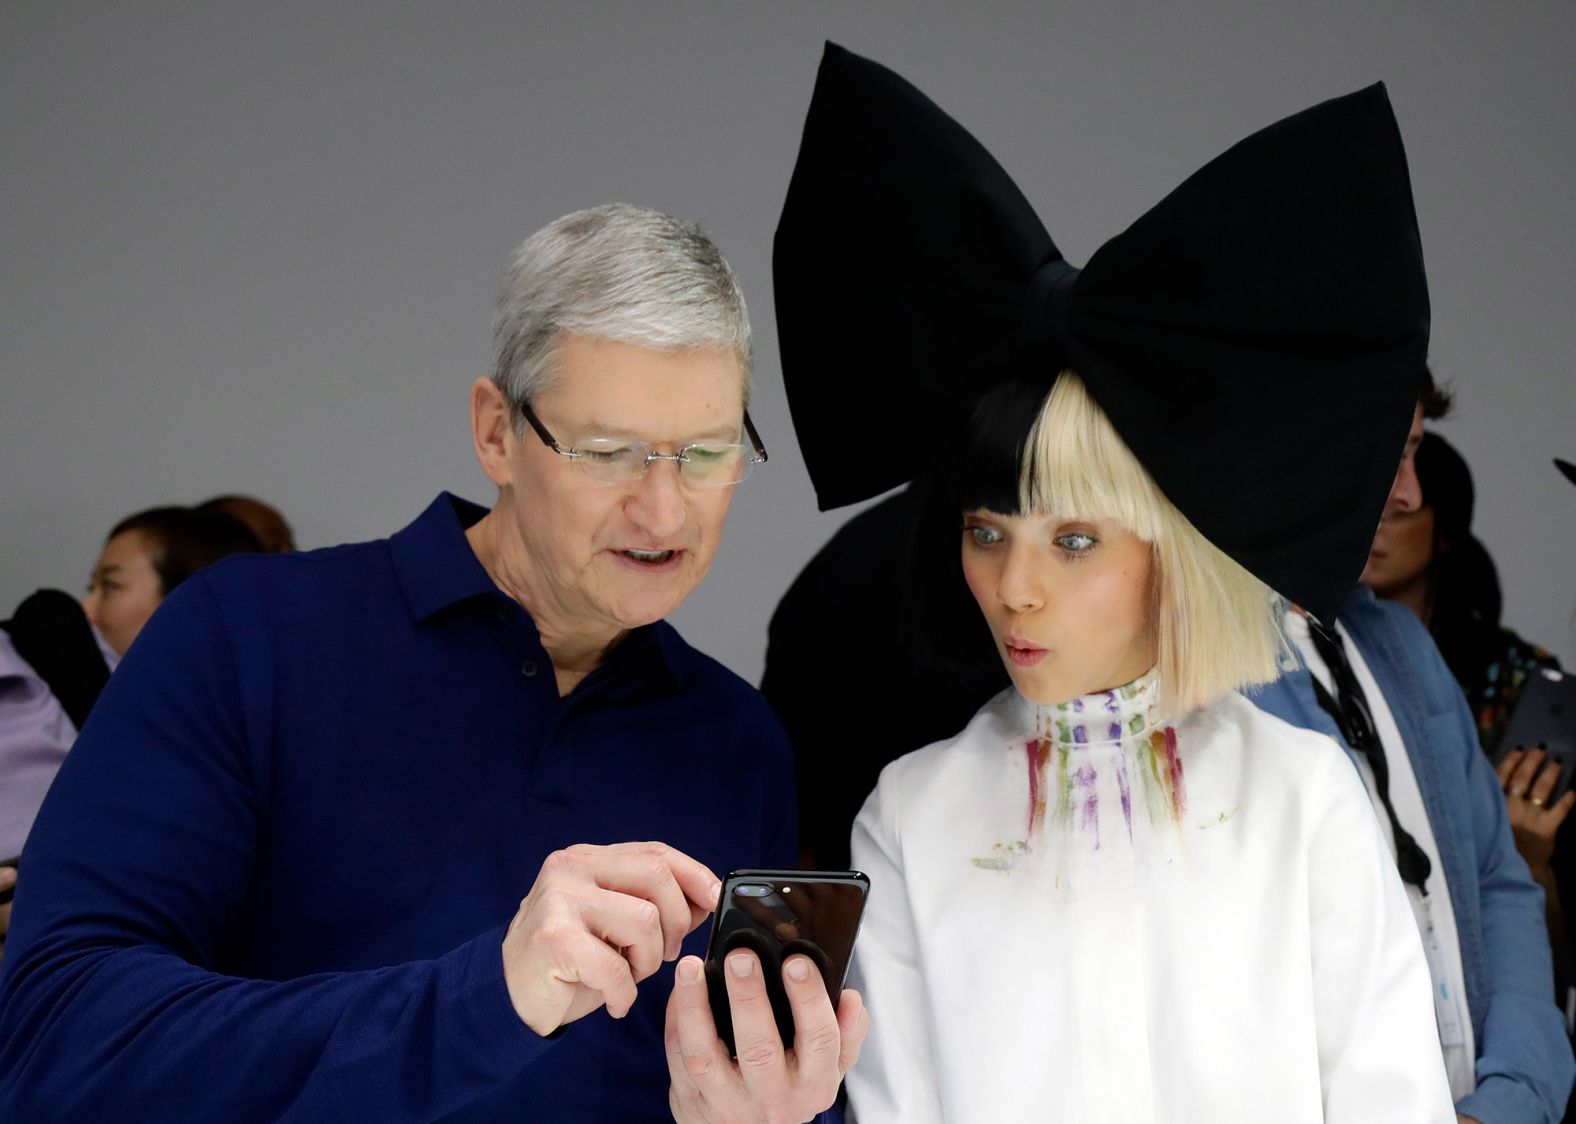 Cook shows an iPhone 7 to performer Maddie Ziegler during an event to announce new products in San Francisco in September 2016.